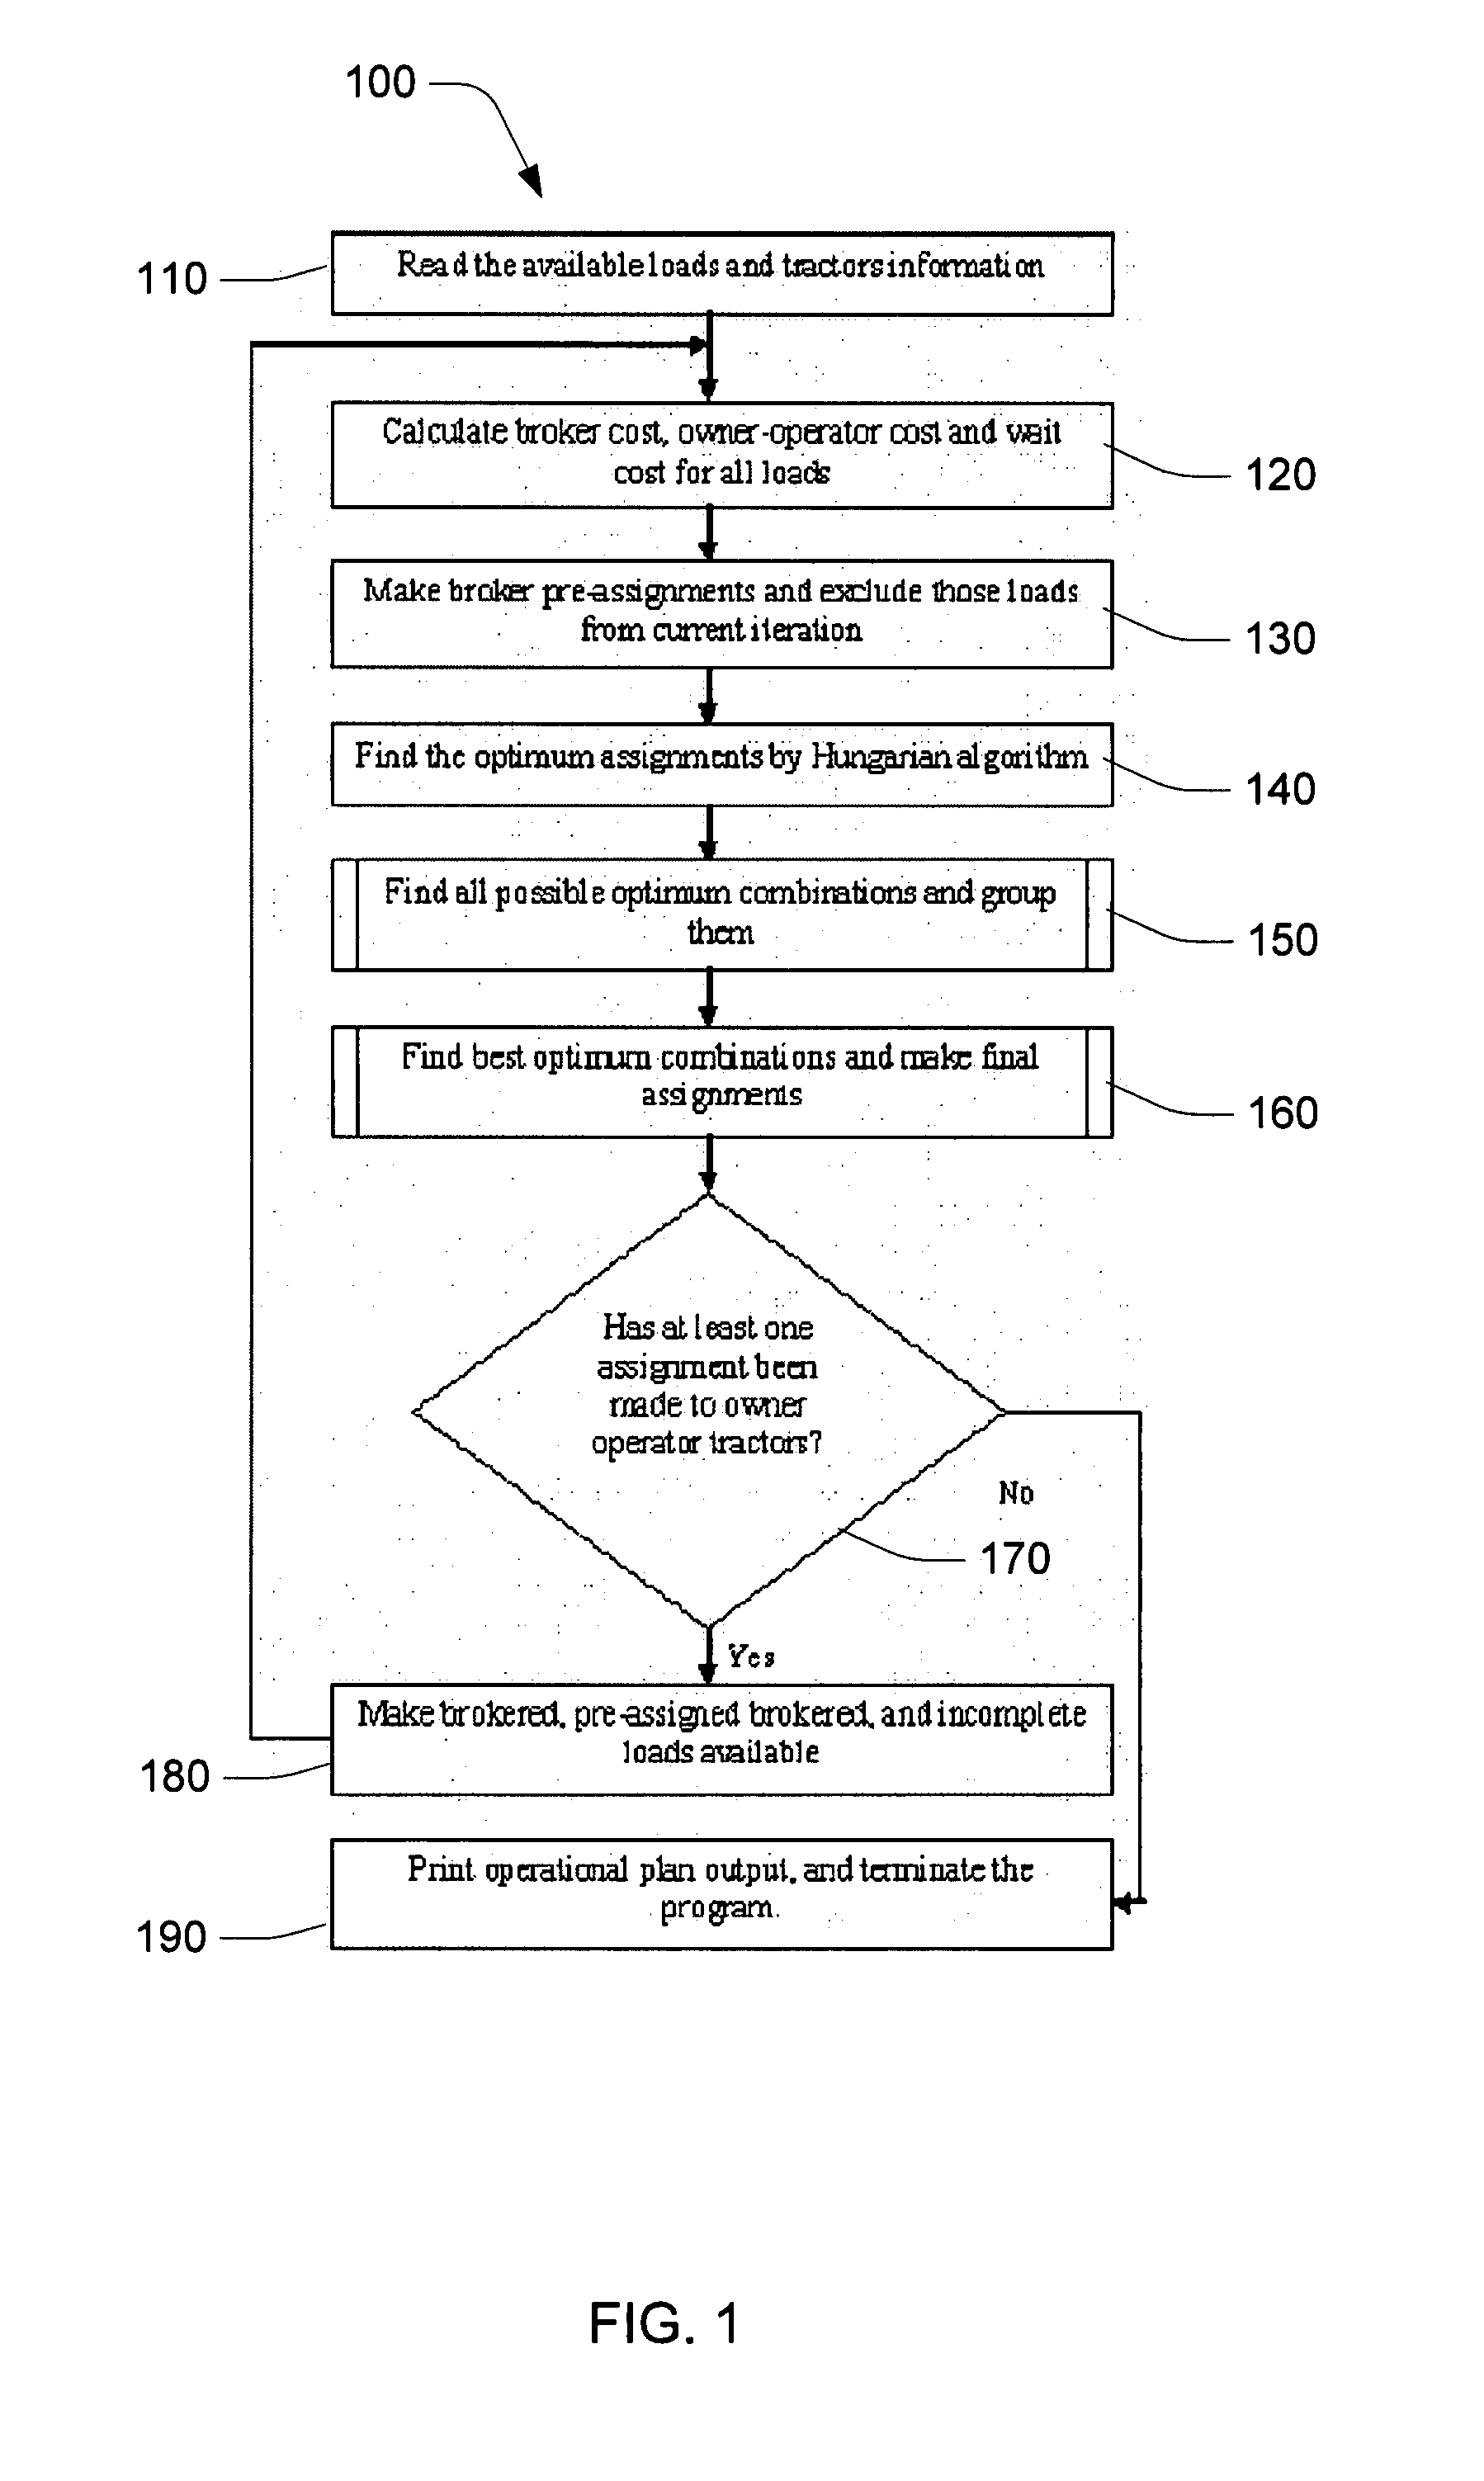 System and method suitable for optimizing linehaul operations